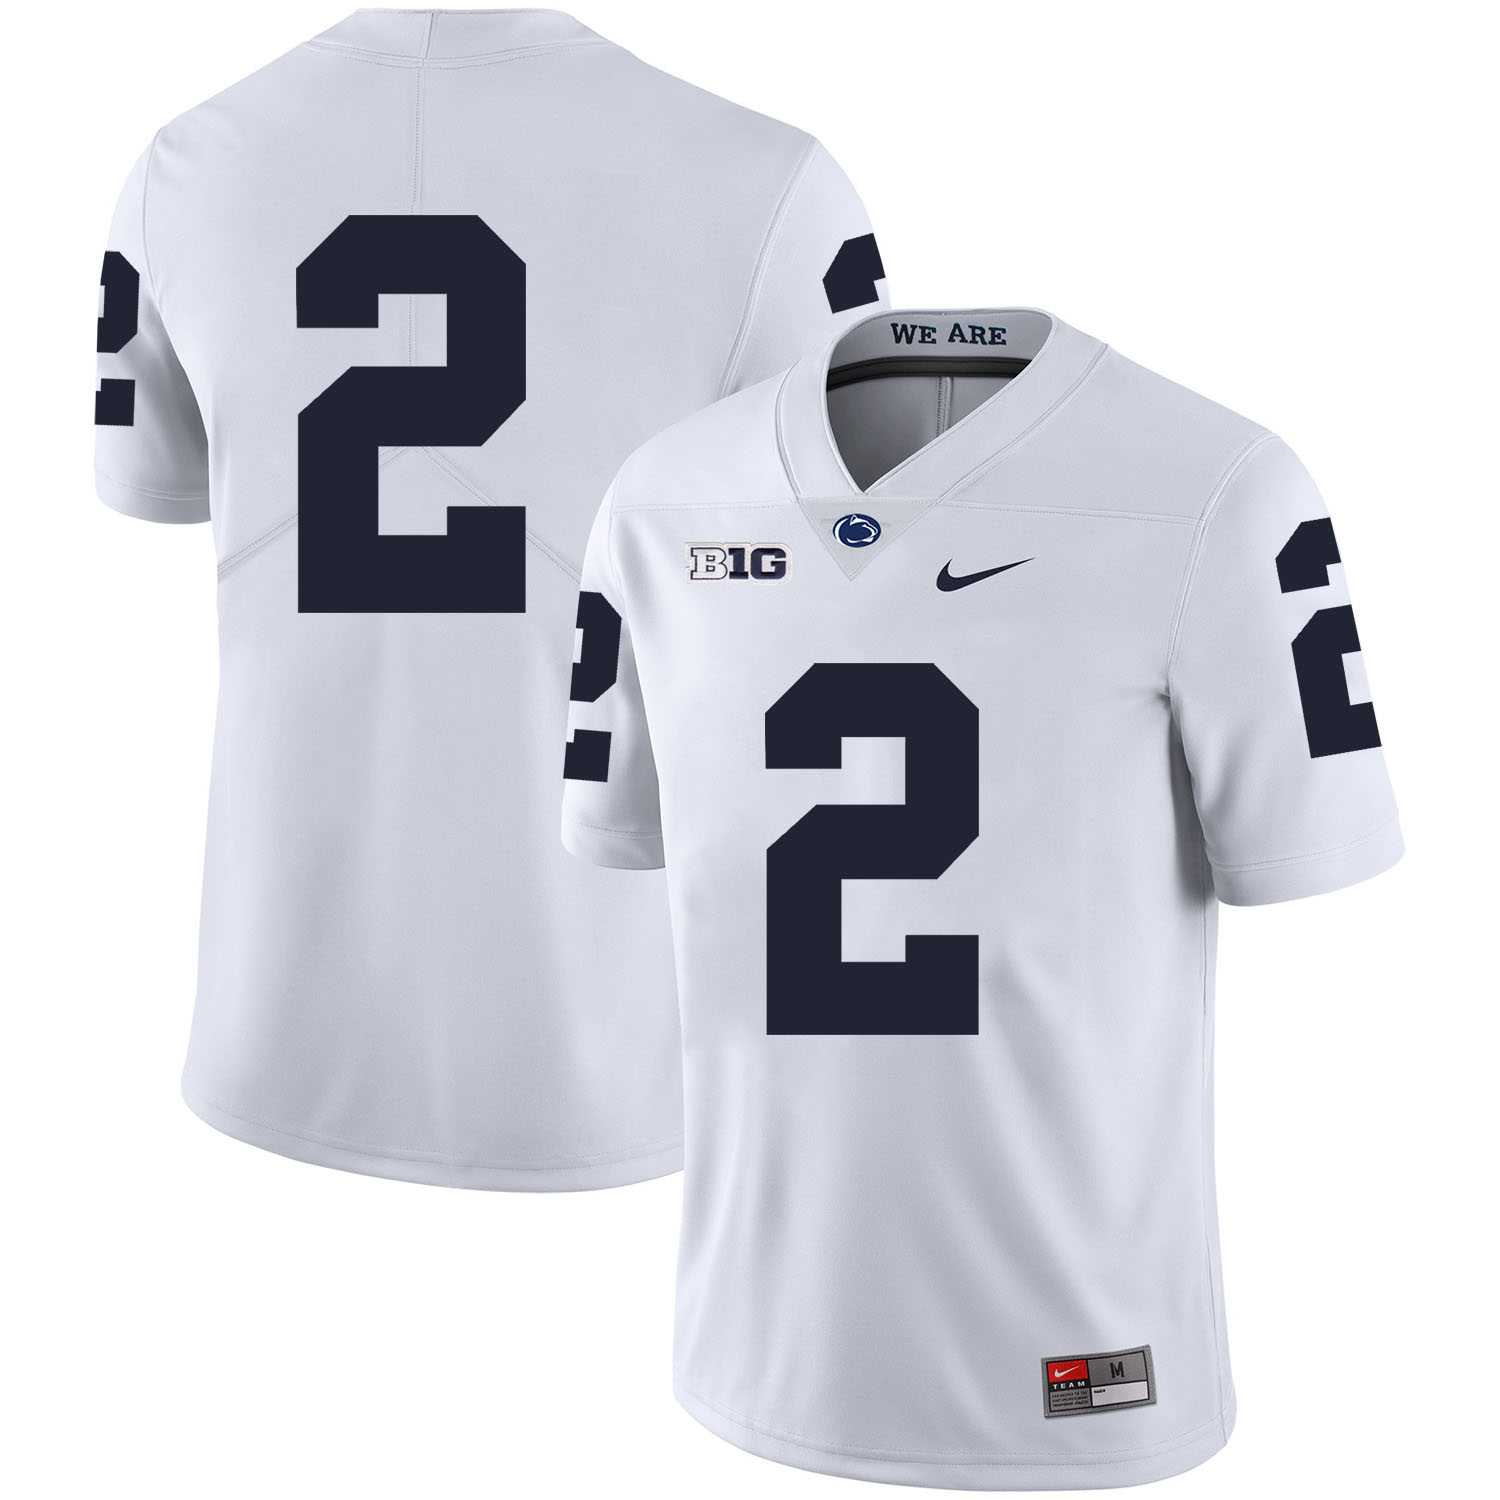 Penn State Nittany Lions 2 Marcus Allen White Nike College Football Jersey Dzhi